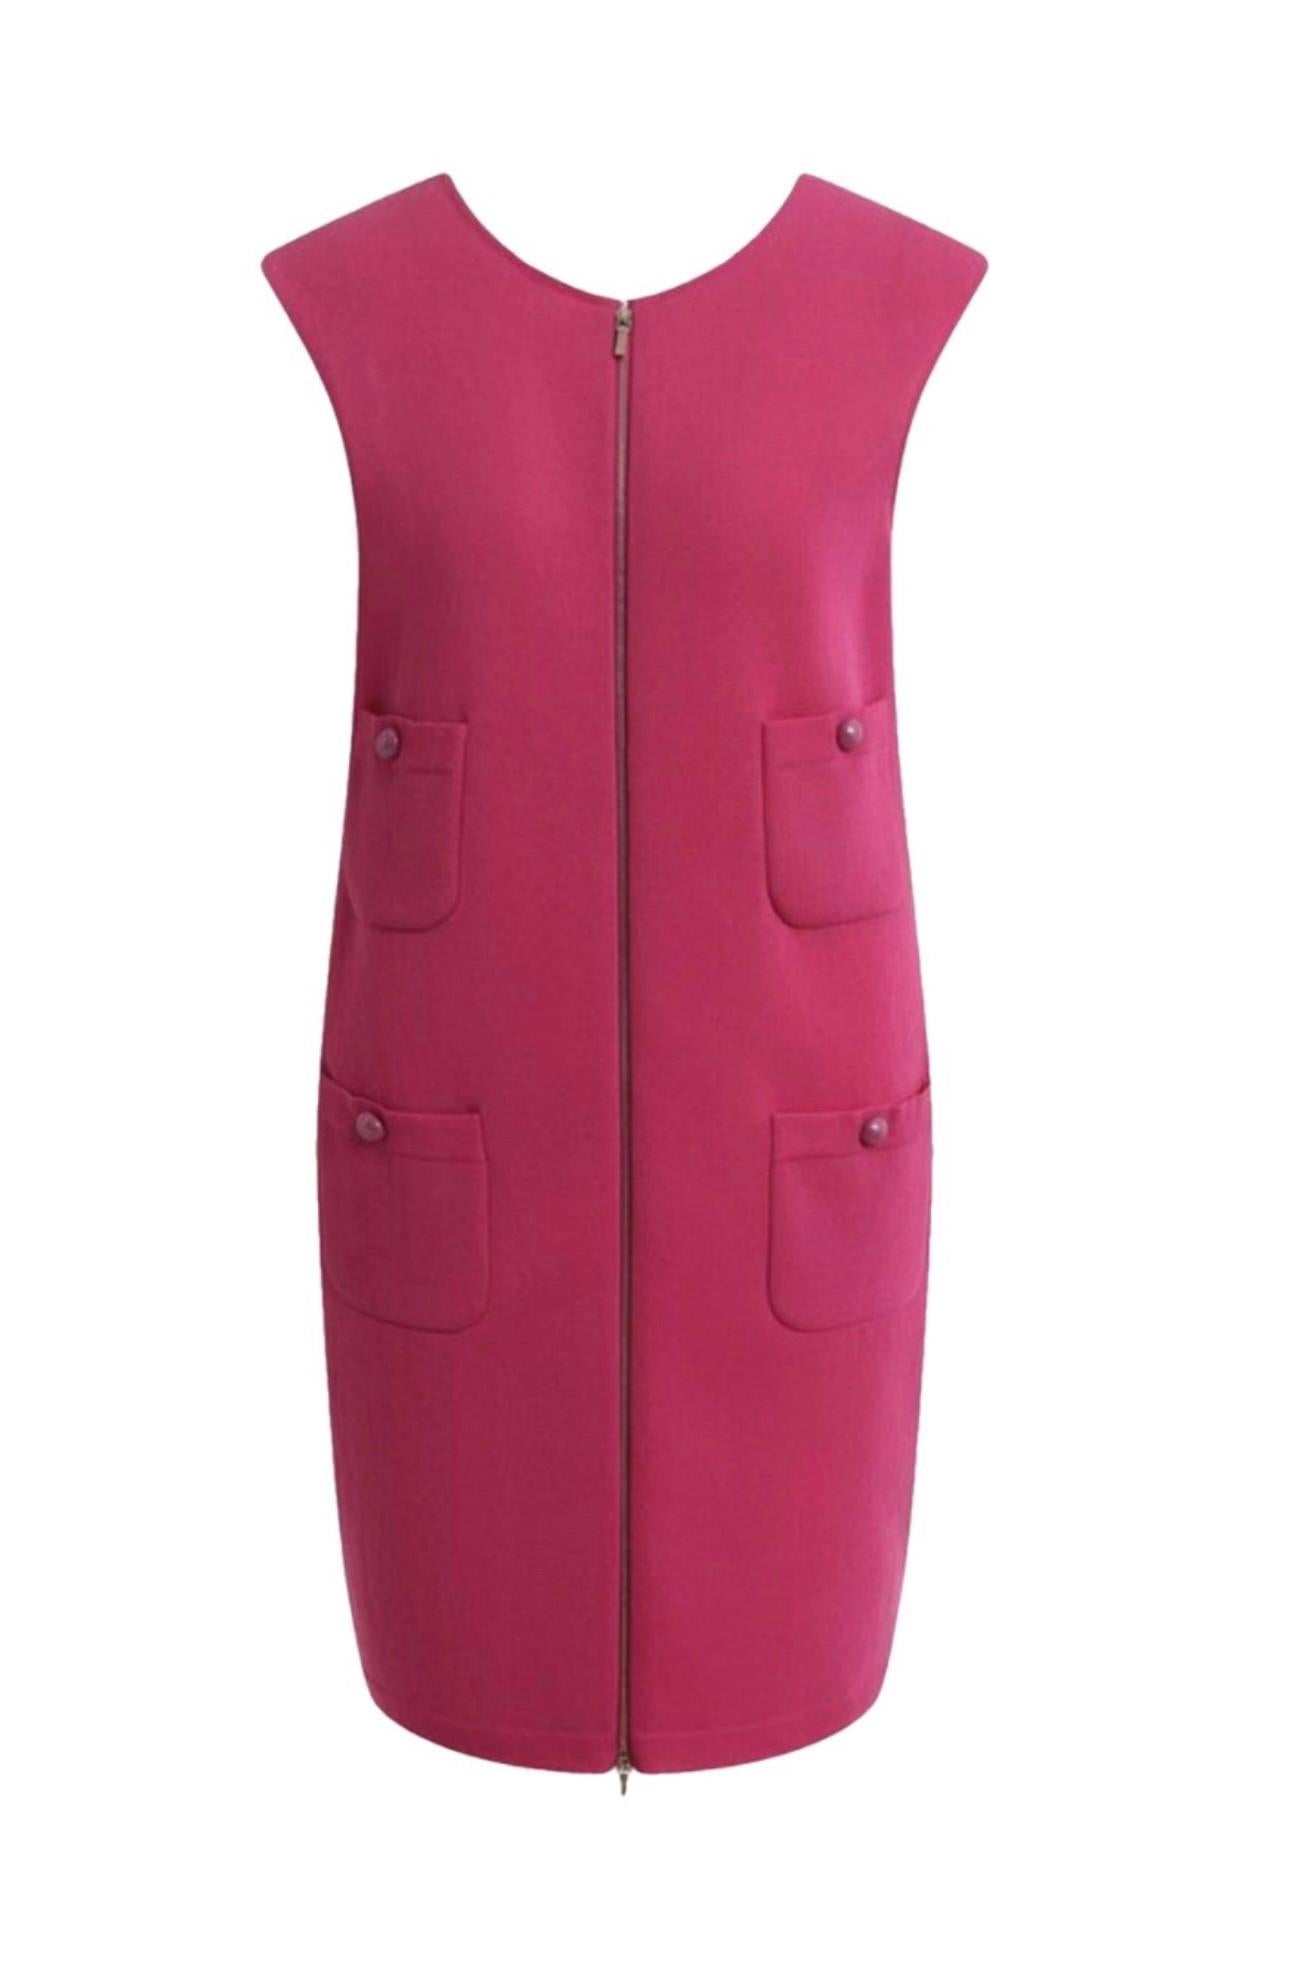 Chanel Stylish Fuchsia Dress with CC Buttons In Excellent Condition For Sale In Dubai, AE